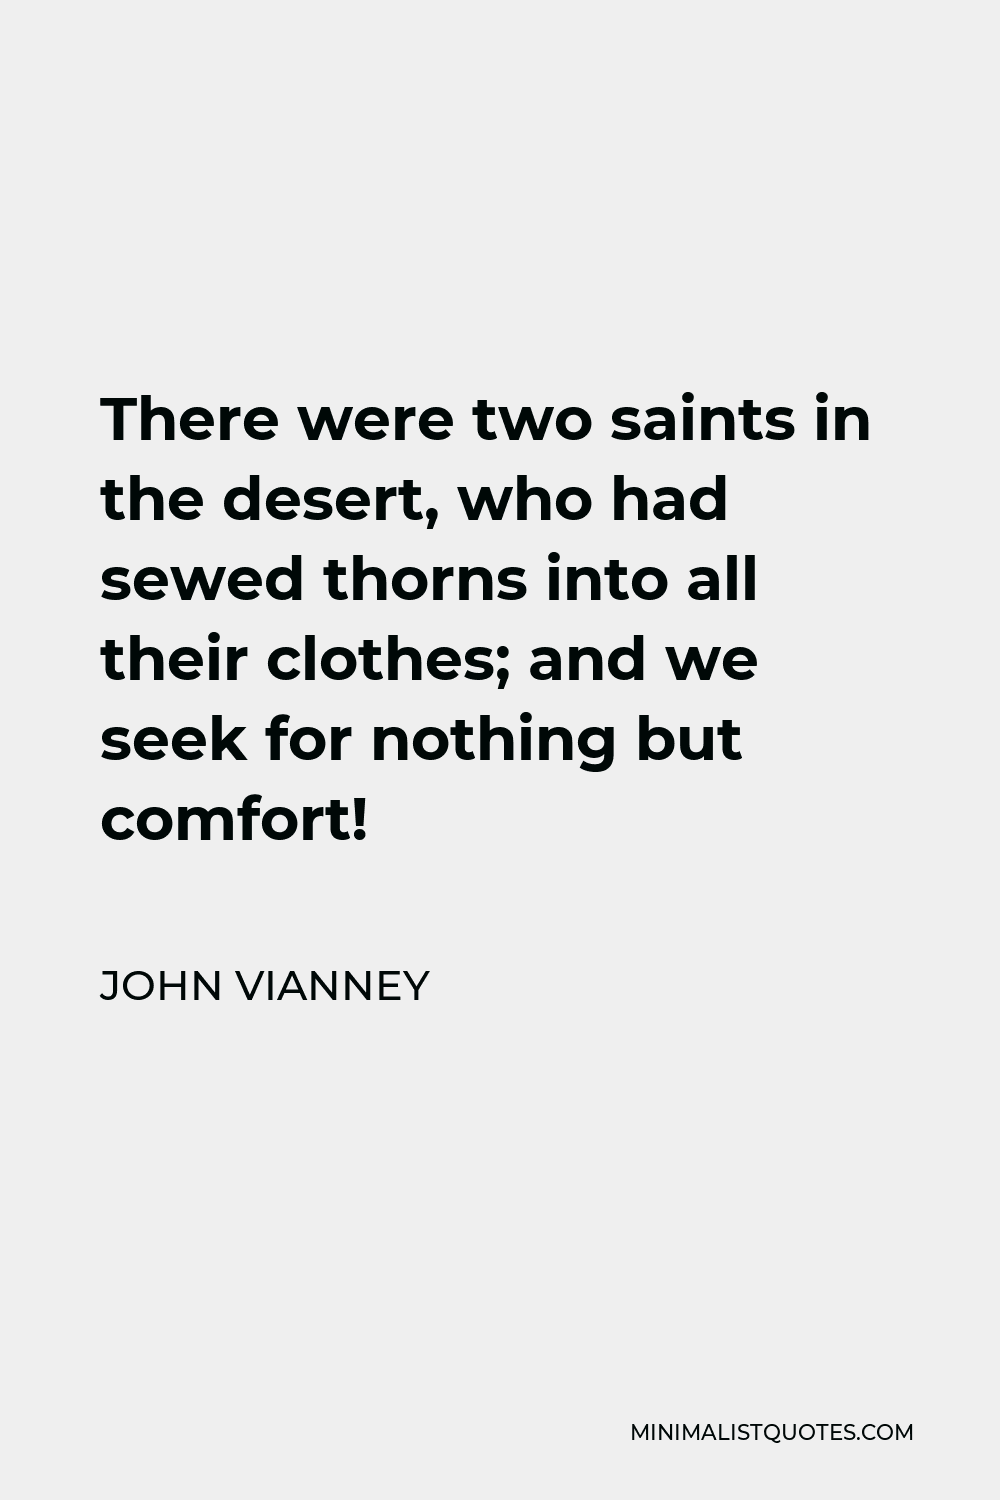 John Vianney Quote - There were two saints in the desert, who had sewed thorns into all their clothes; and we seek for nothing but comfort!